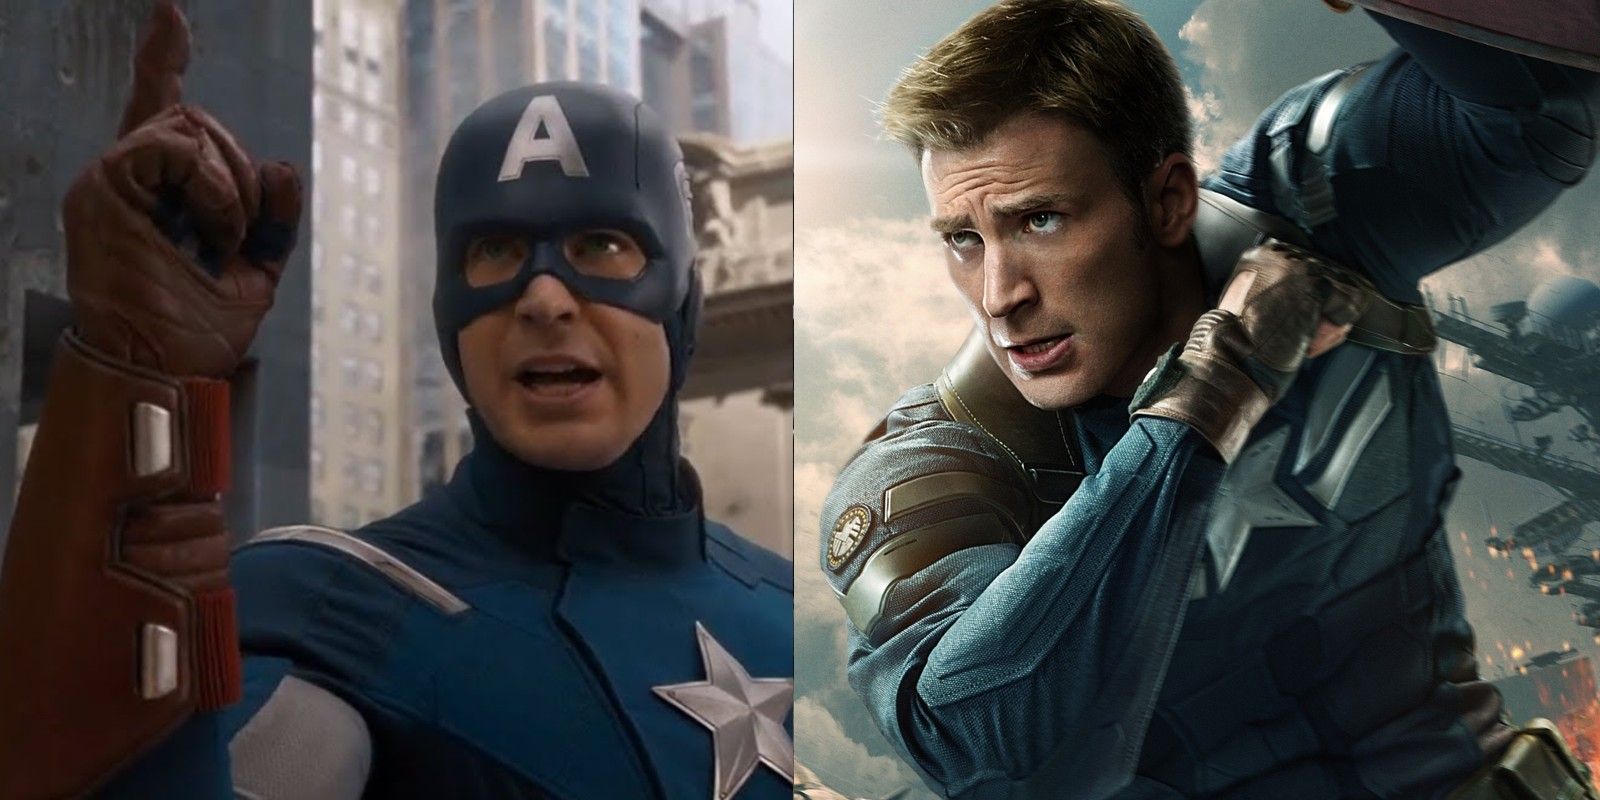 MCU Captain America switches gloves from Avengers to Winter Soldier